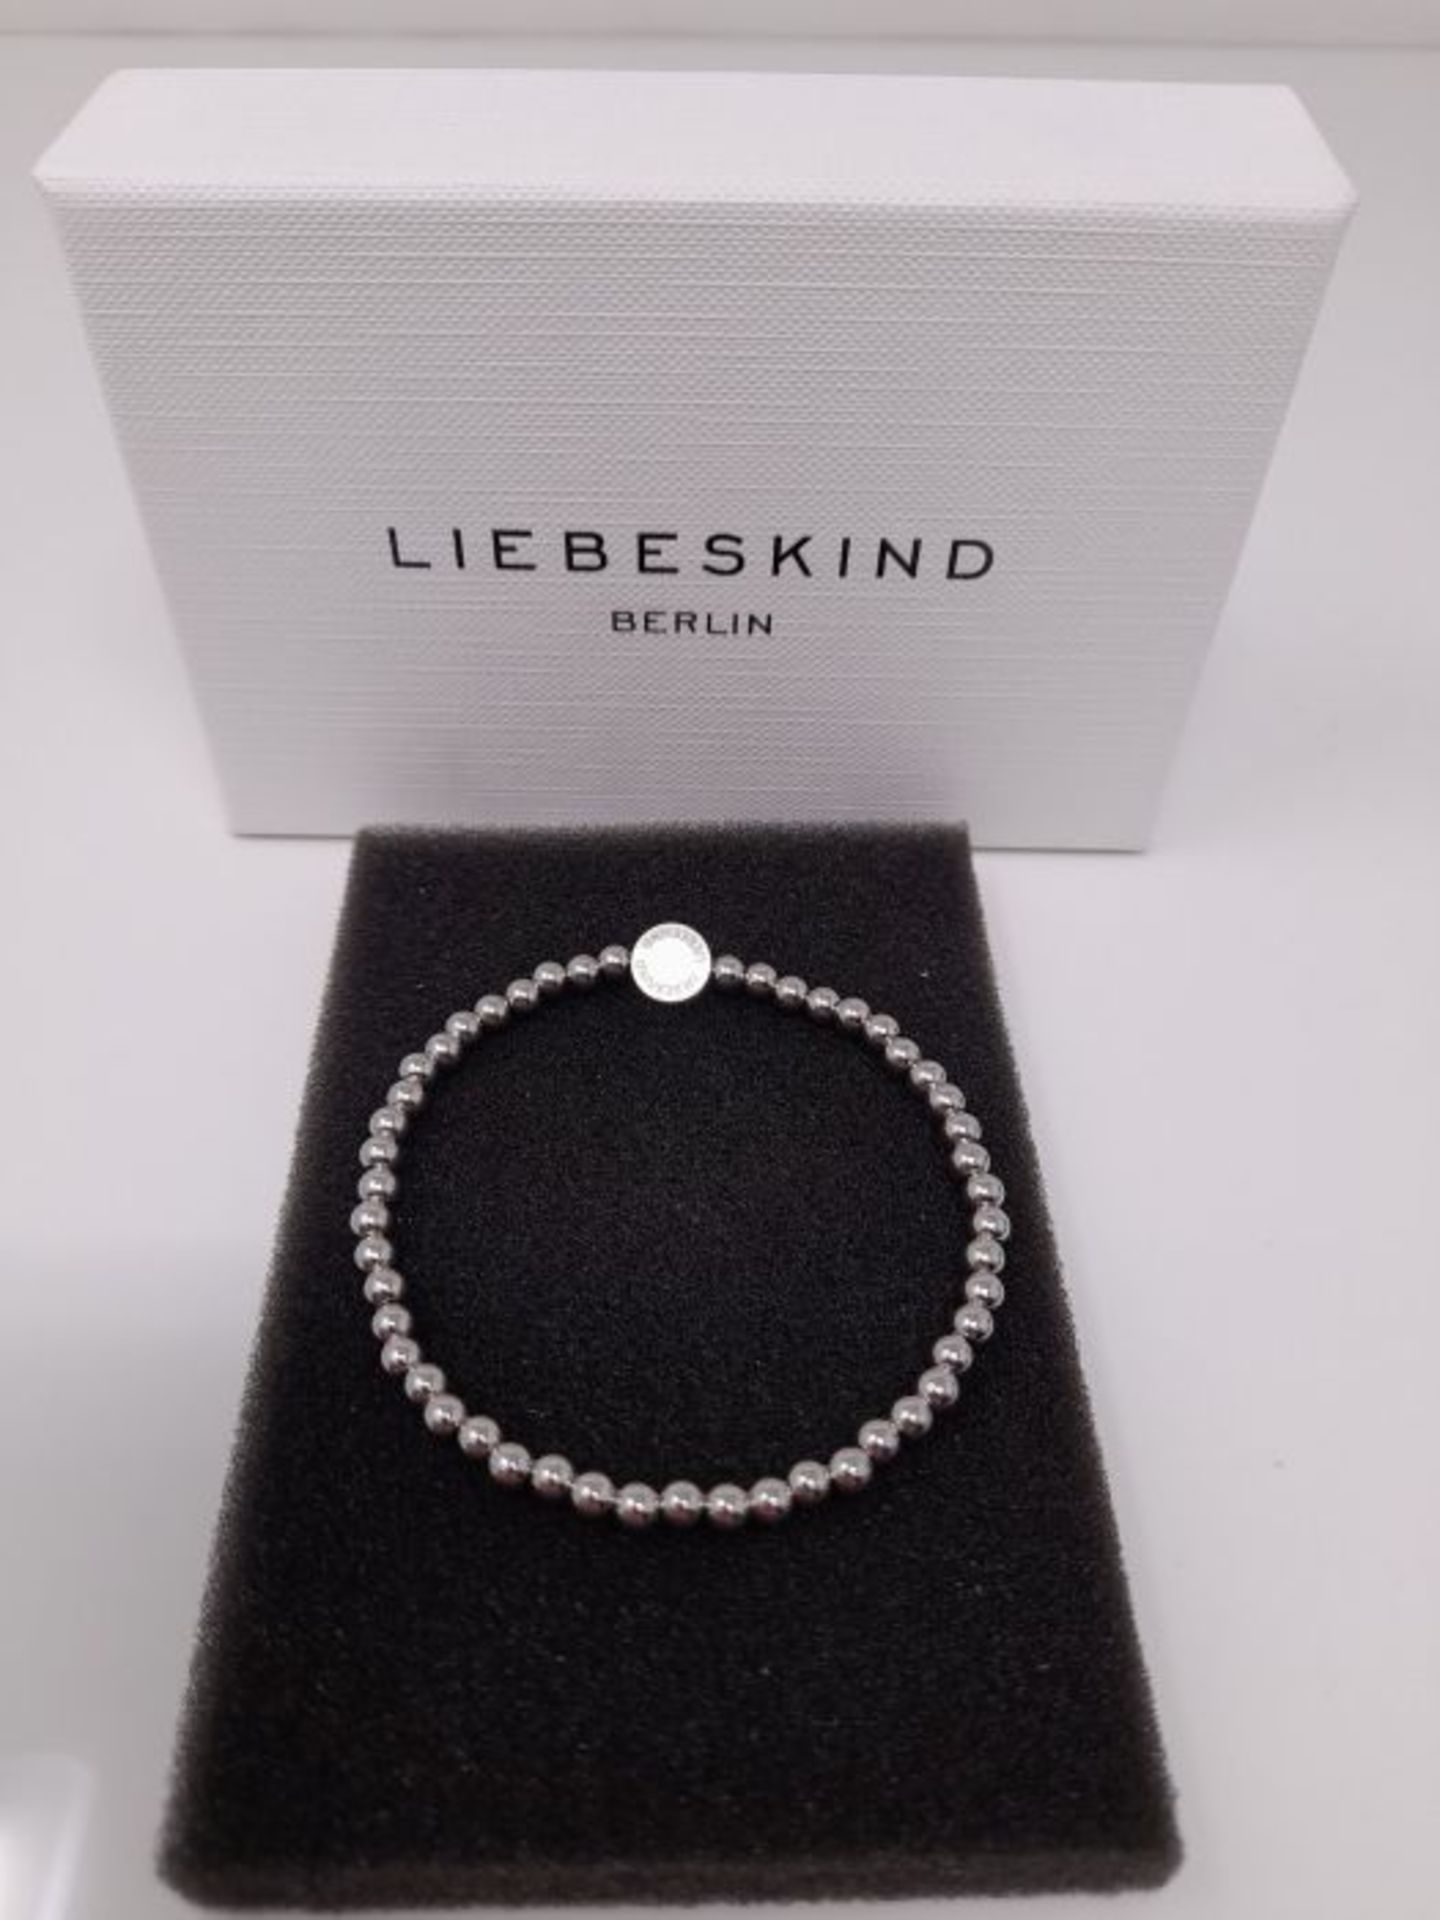 [CRACKED] LIEBESKIND BERLIN Beads 6mm mit Logotag in Edelstahl - Image 3 of 3